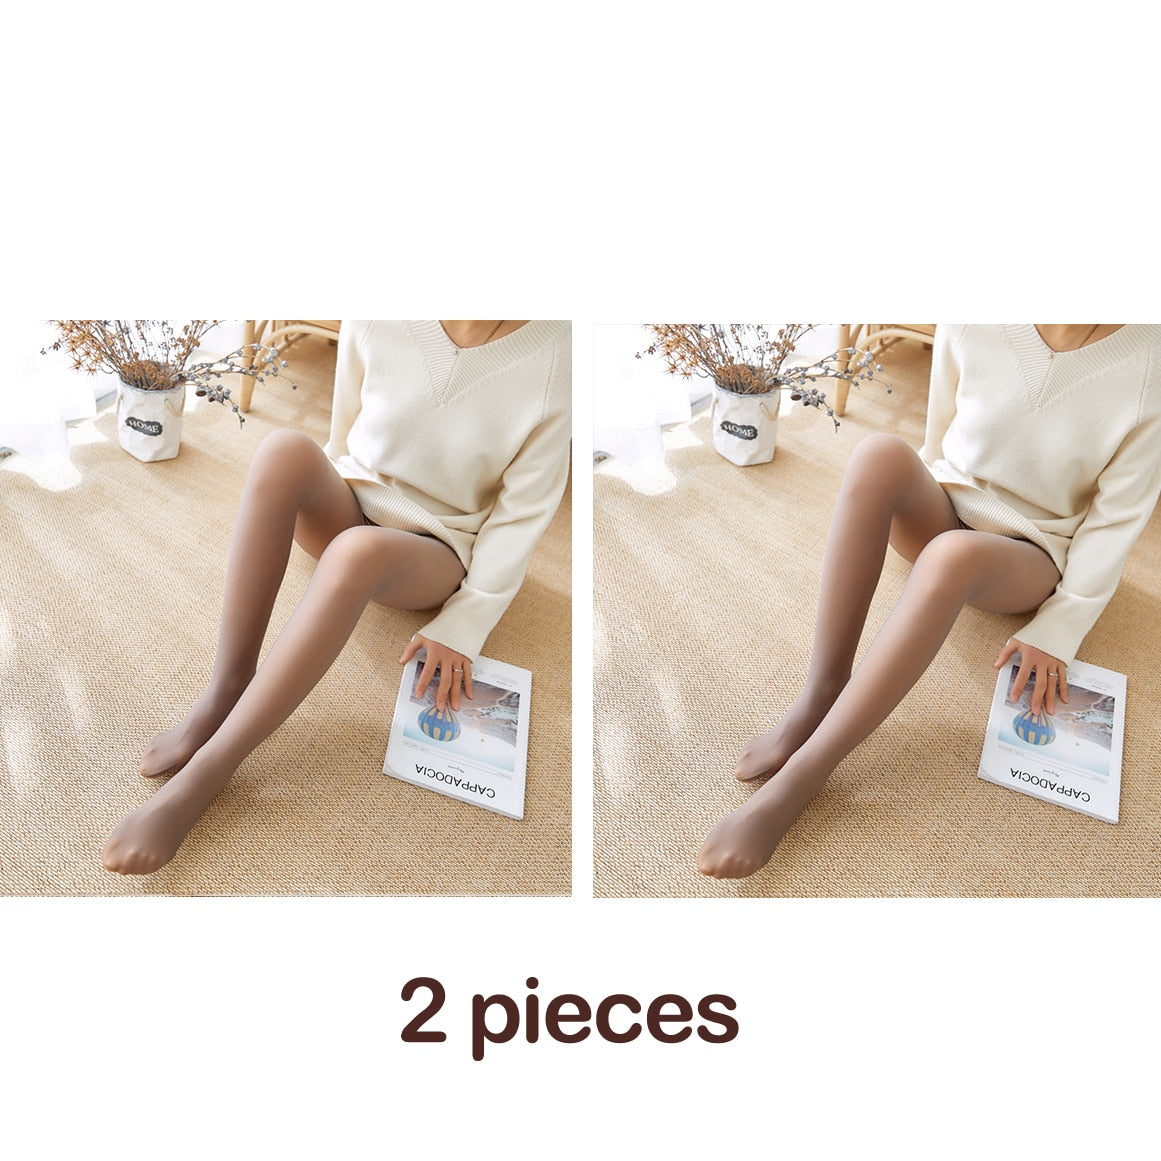 2 pieces High Quality Women Tights Pantyhose Transparent